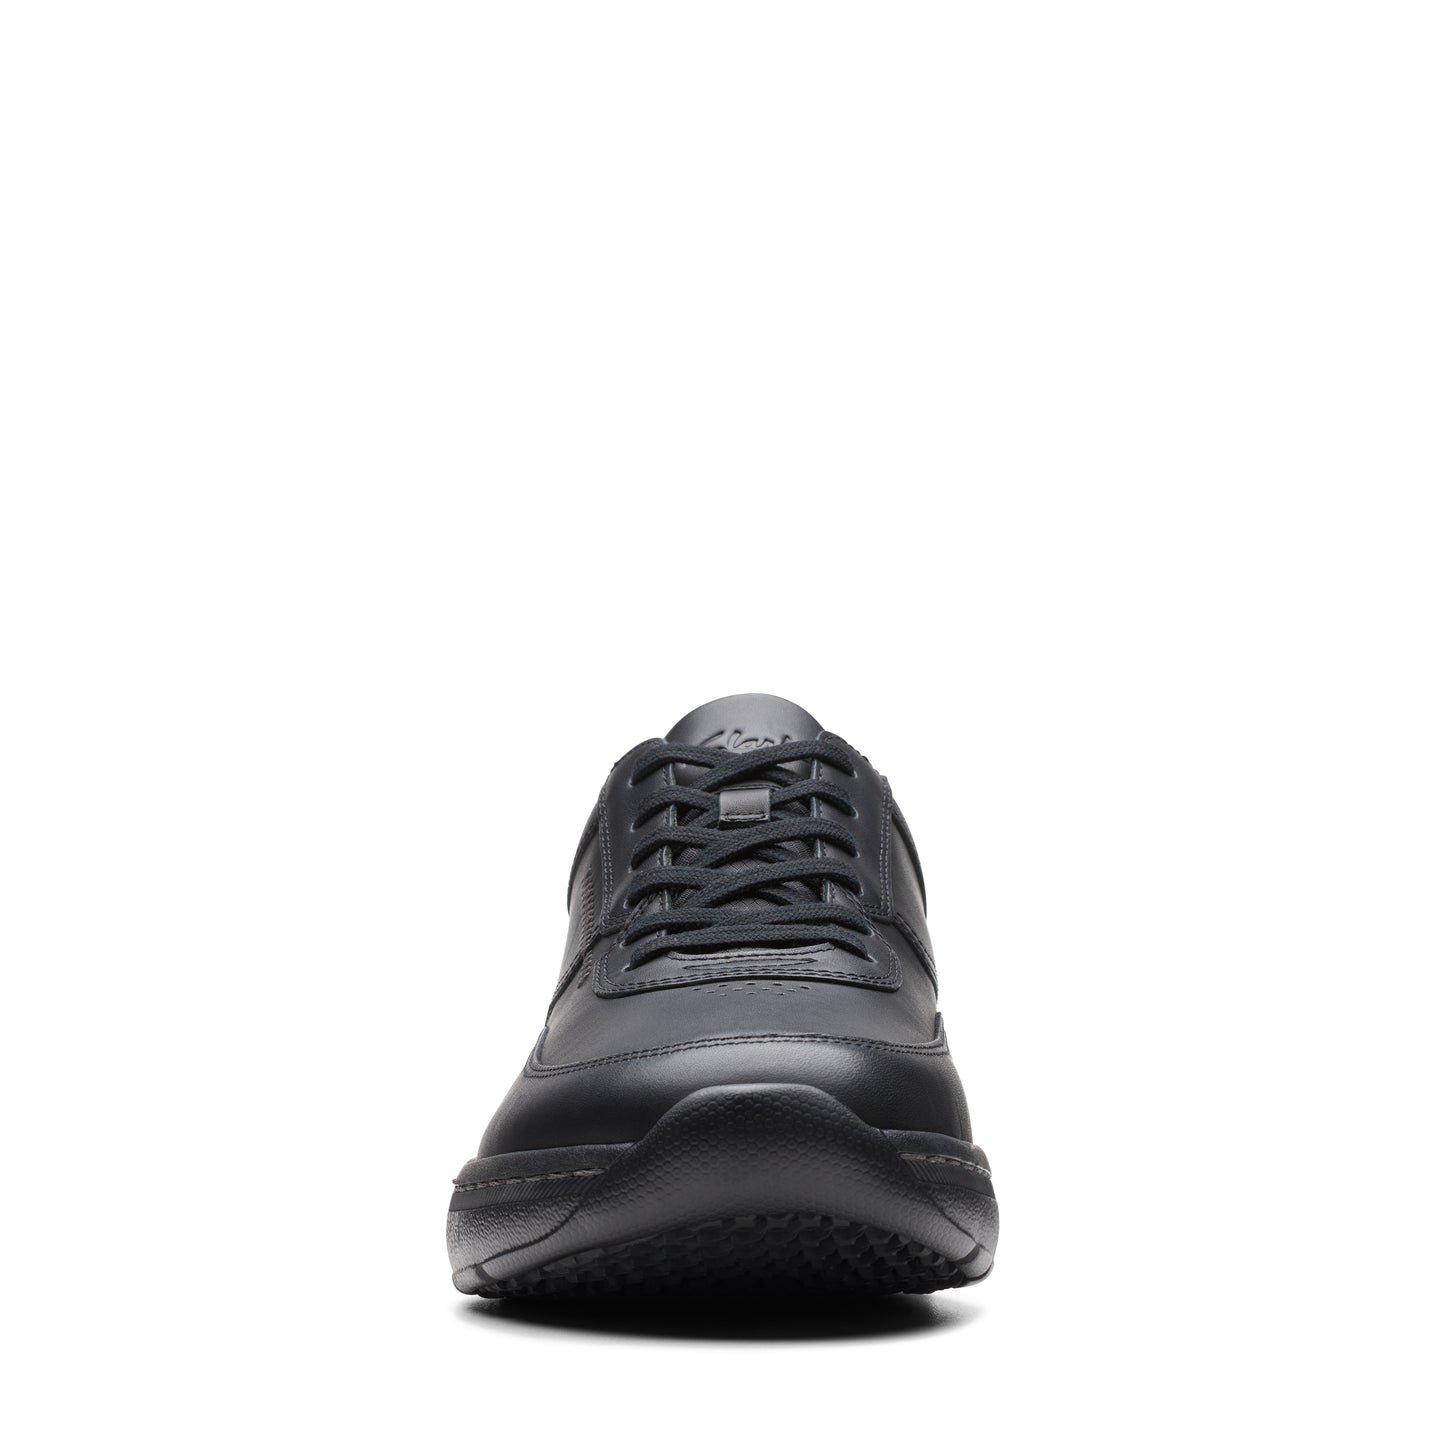 Clarkspro Lace Leather Black